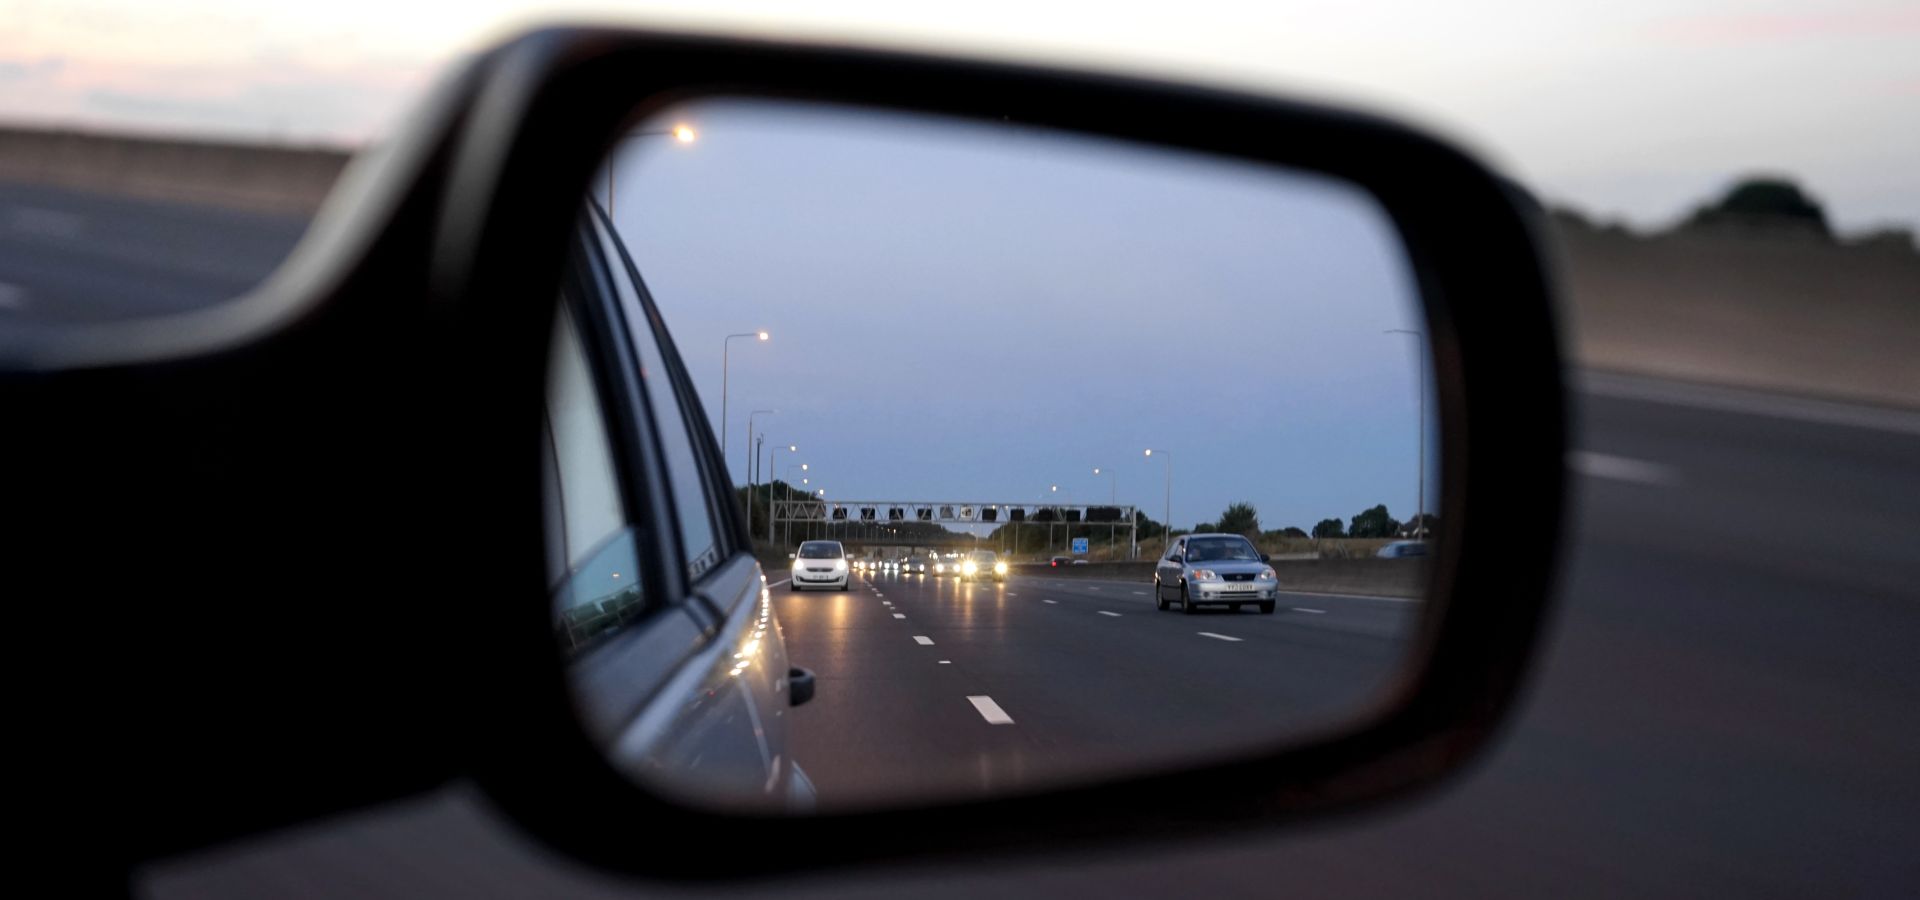 view of the autobahn from a rear view mirror